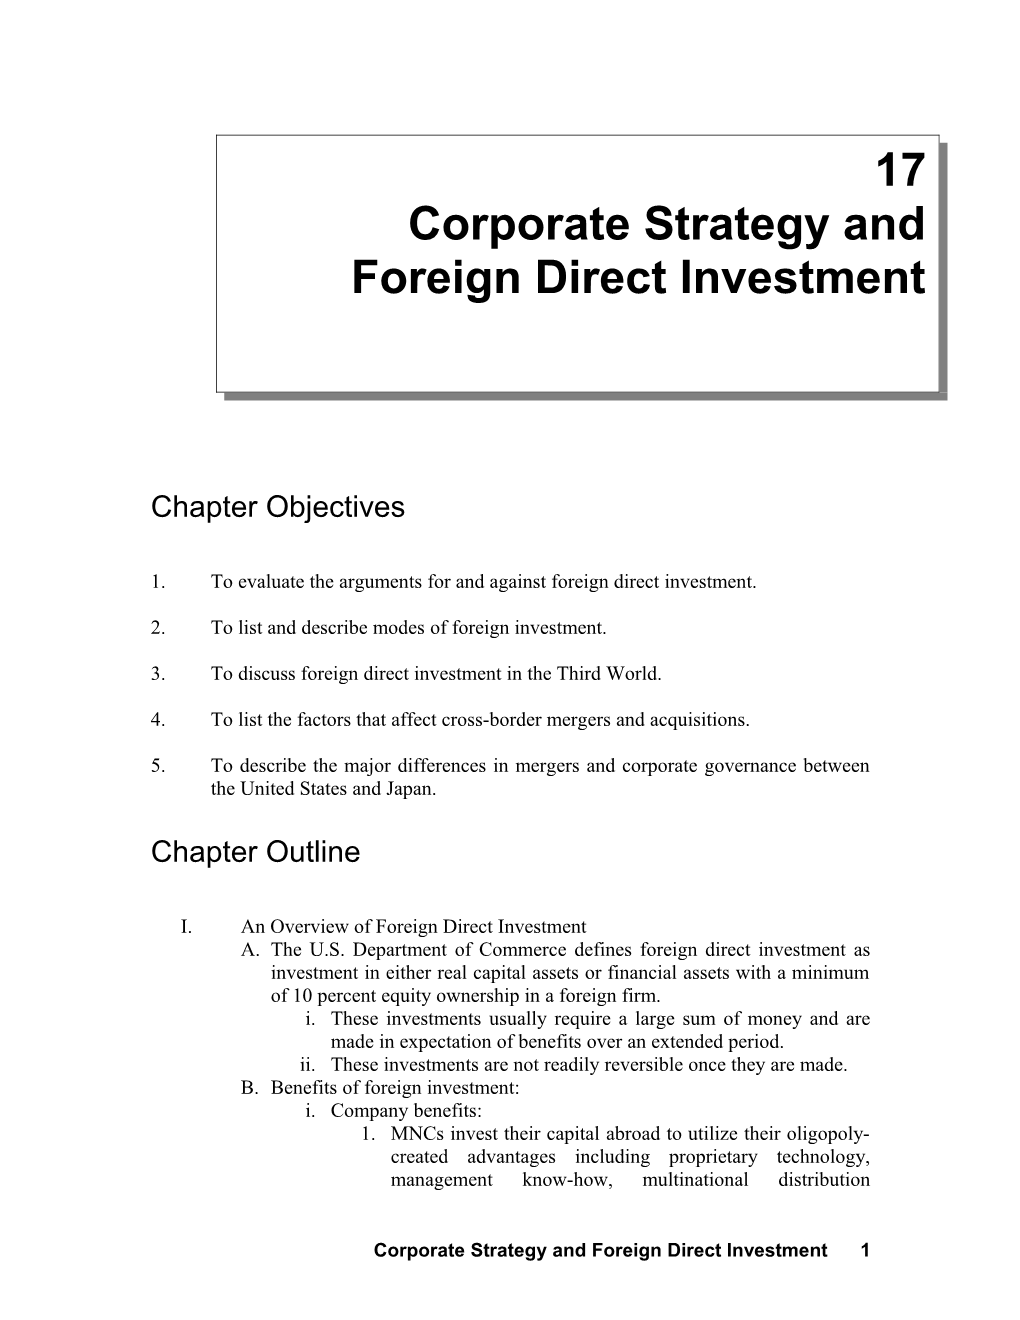 1.To Evaluate the Arguments for and Against Foreign Direct Investment